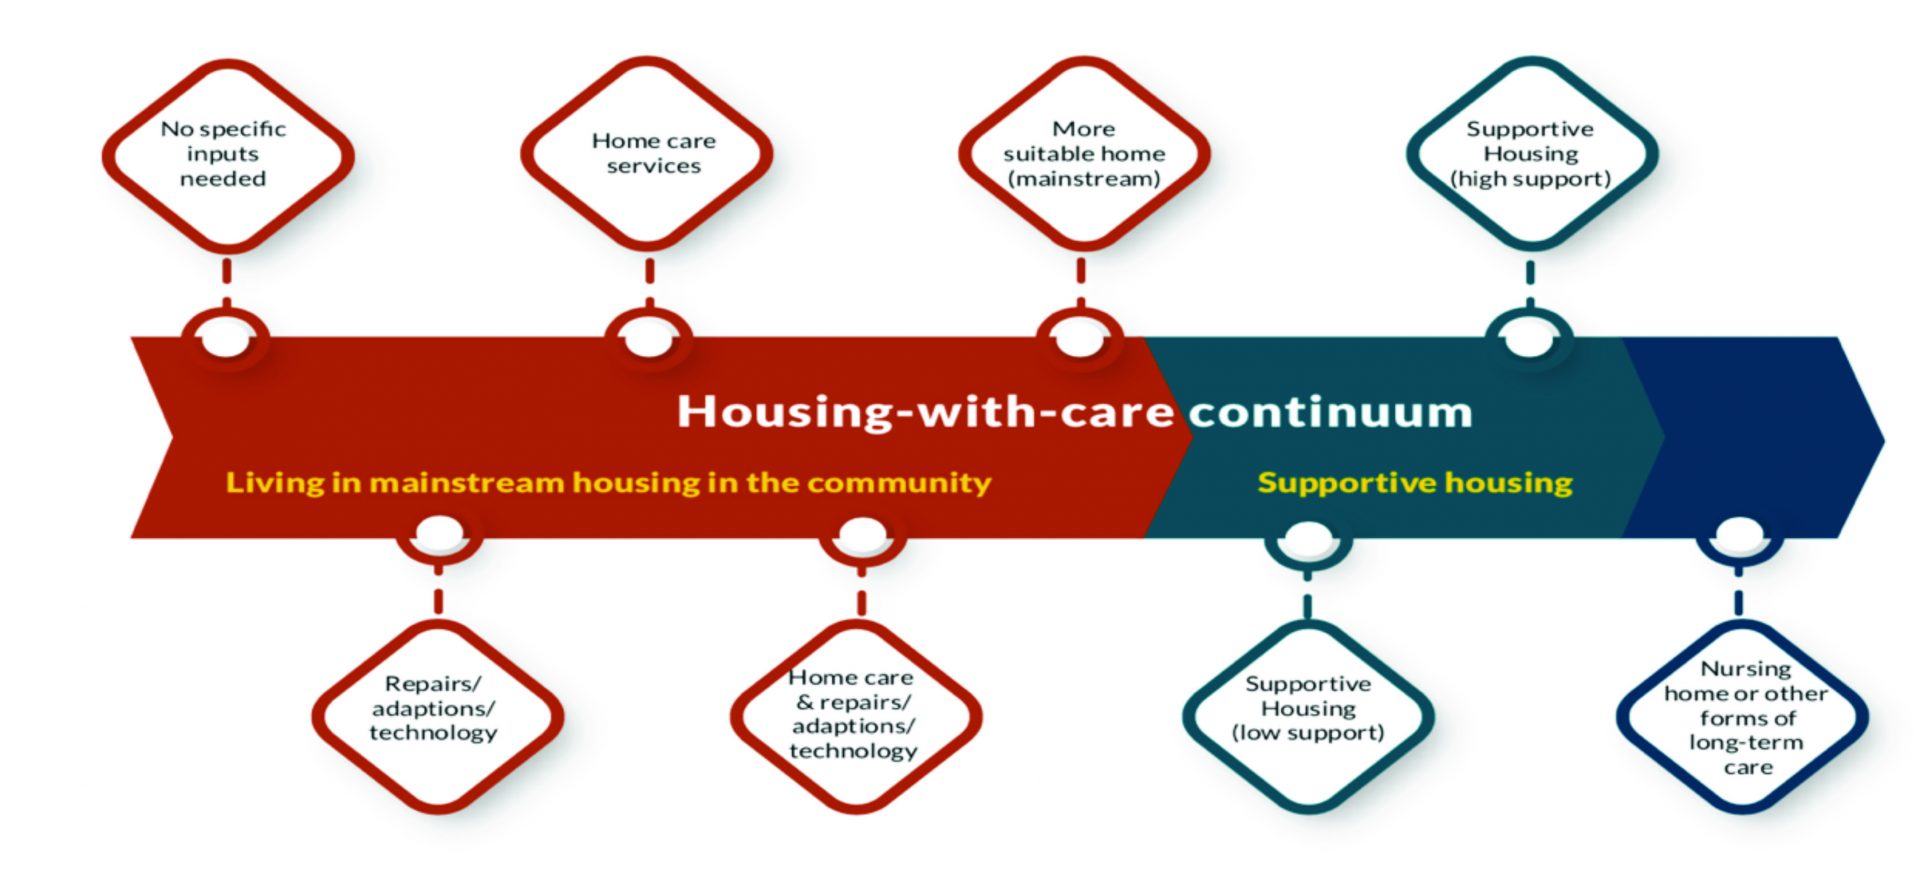 Housing with care continuumNo specific inputs / care requiredHome repairs, adaptions or technology Home care services Home care & housing repairs, adaptions or technologyMoving to a more suitable homeSupportive housing with low supportSupportive housing with high supportNursing home or other form of long term care